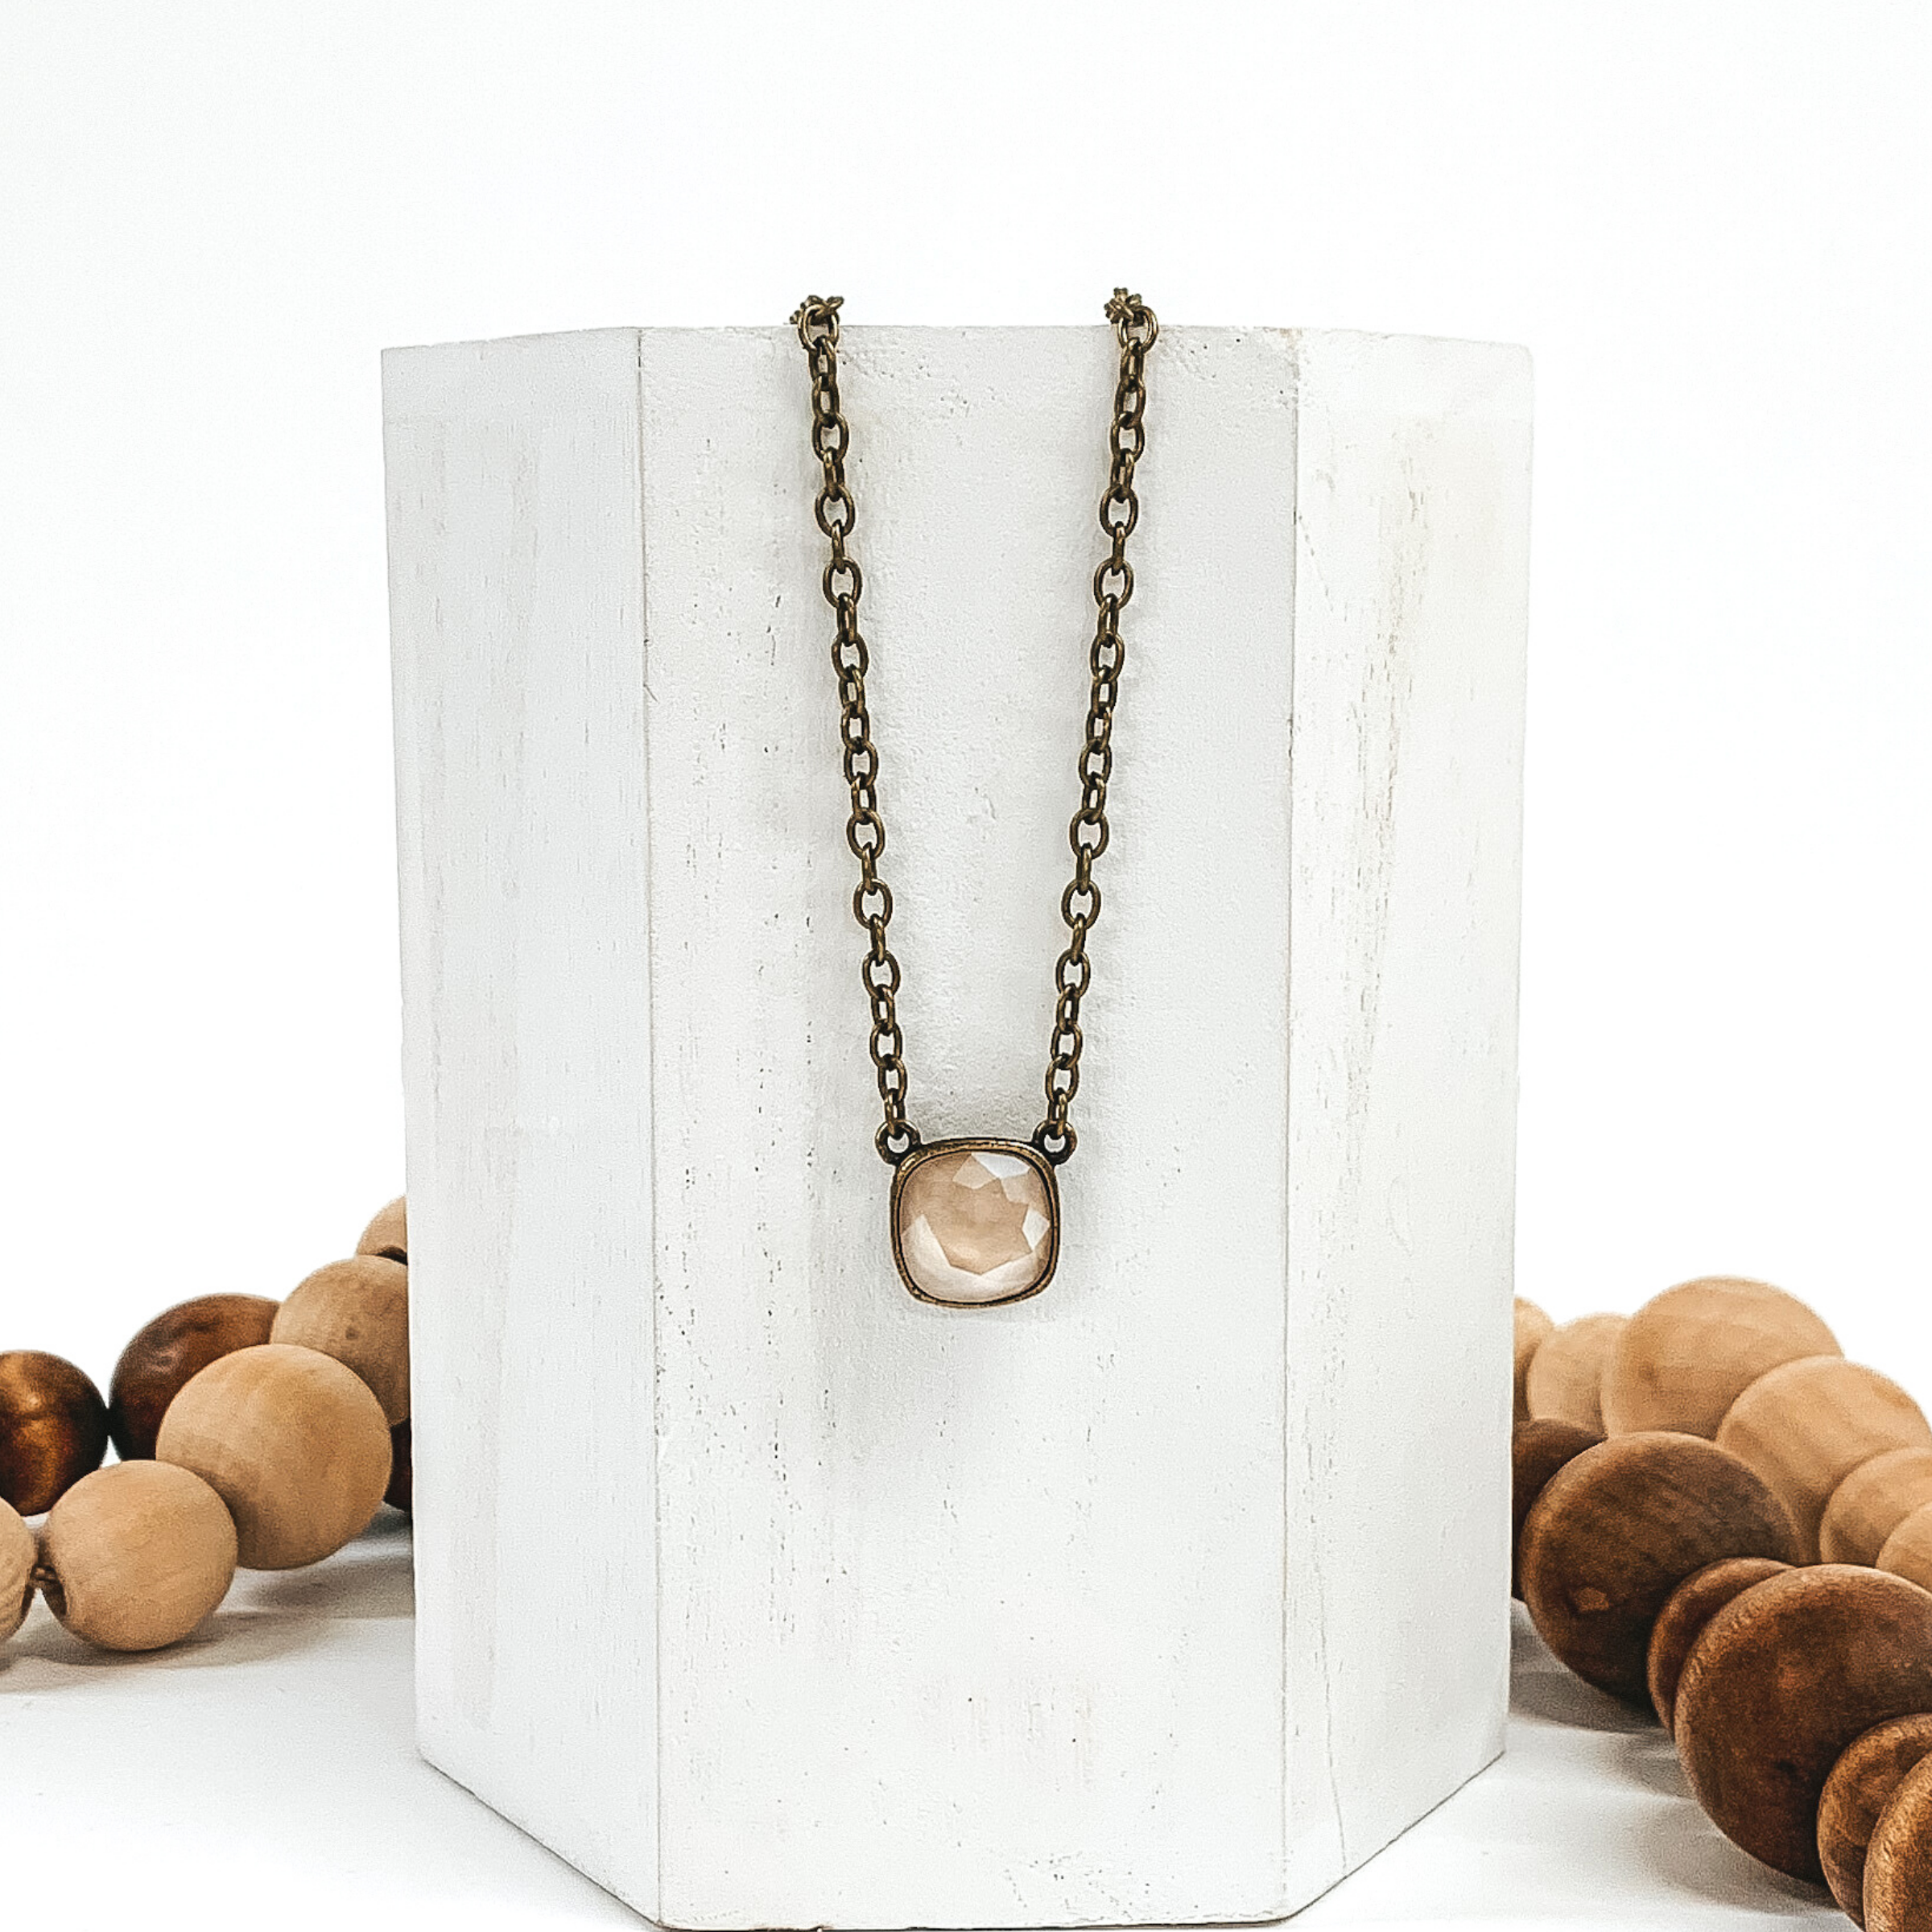 Bronze chained necklace with a square ivory crystal. This necklace is hanging on a white block that is in front of brown and tan beads. 